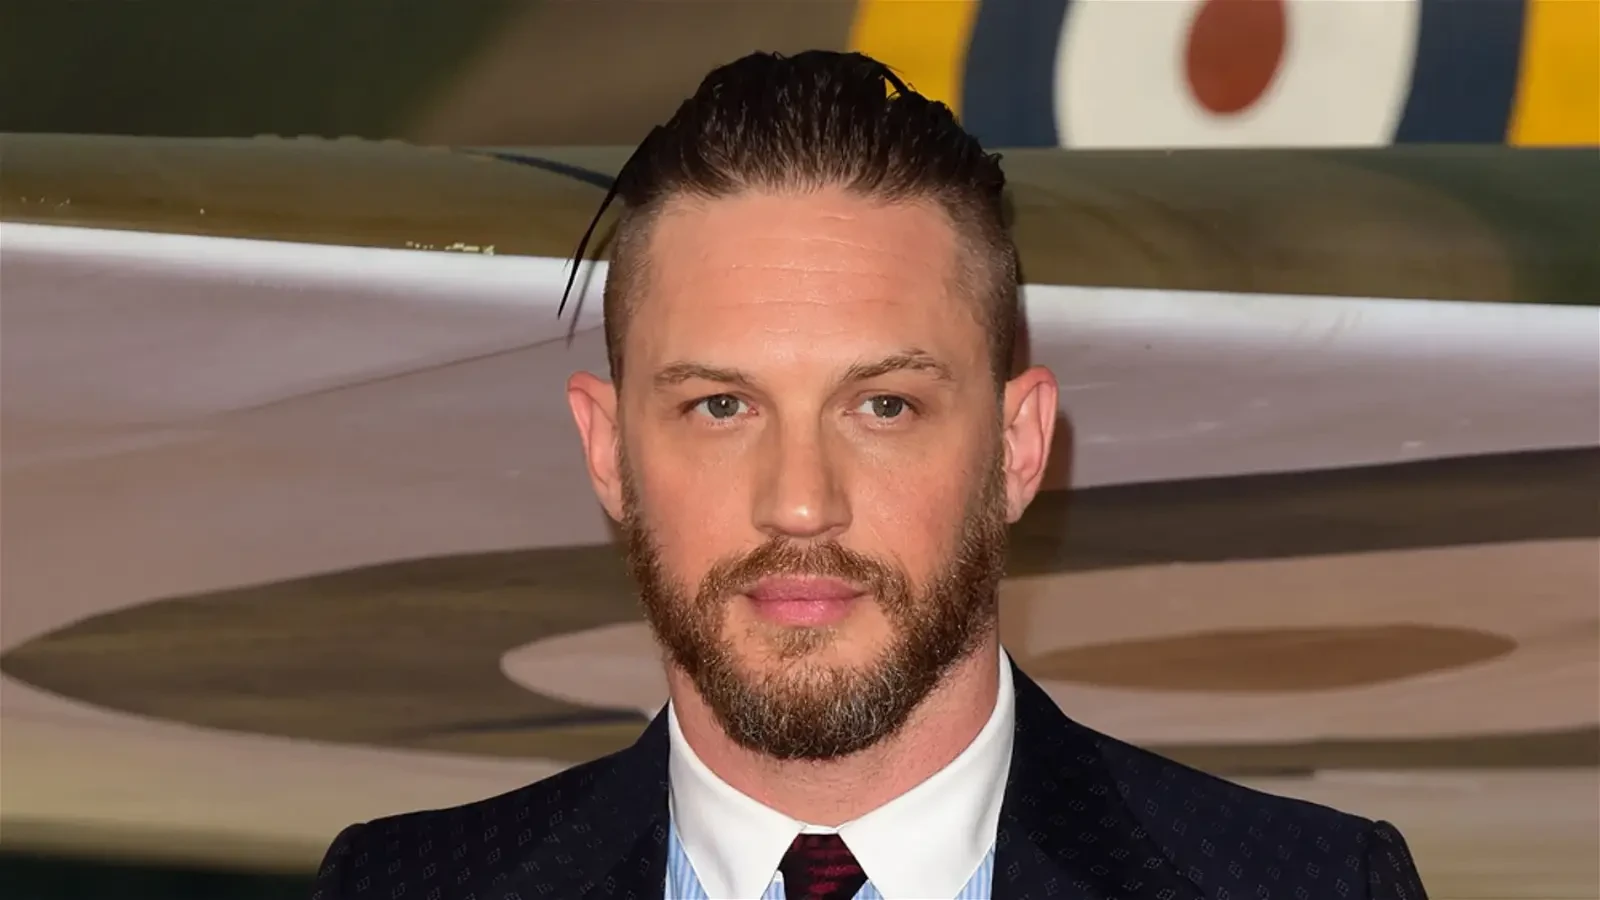 Tom Hardy gave a different version of what actually took place